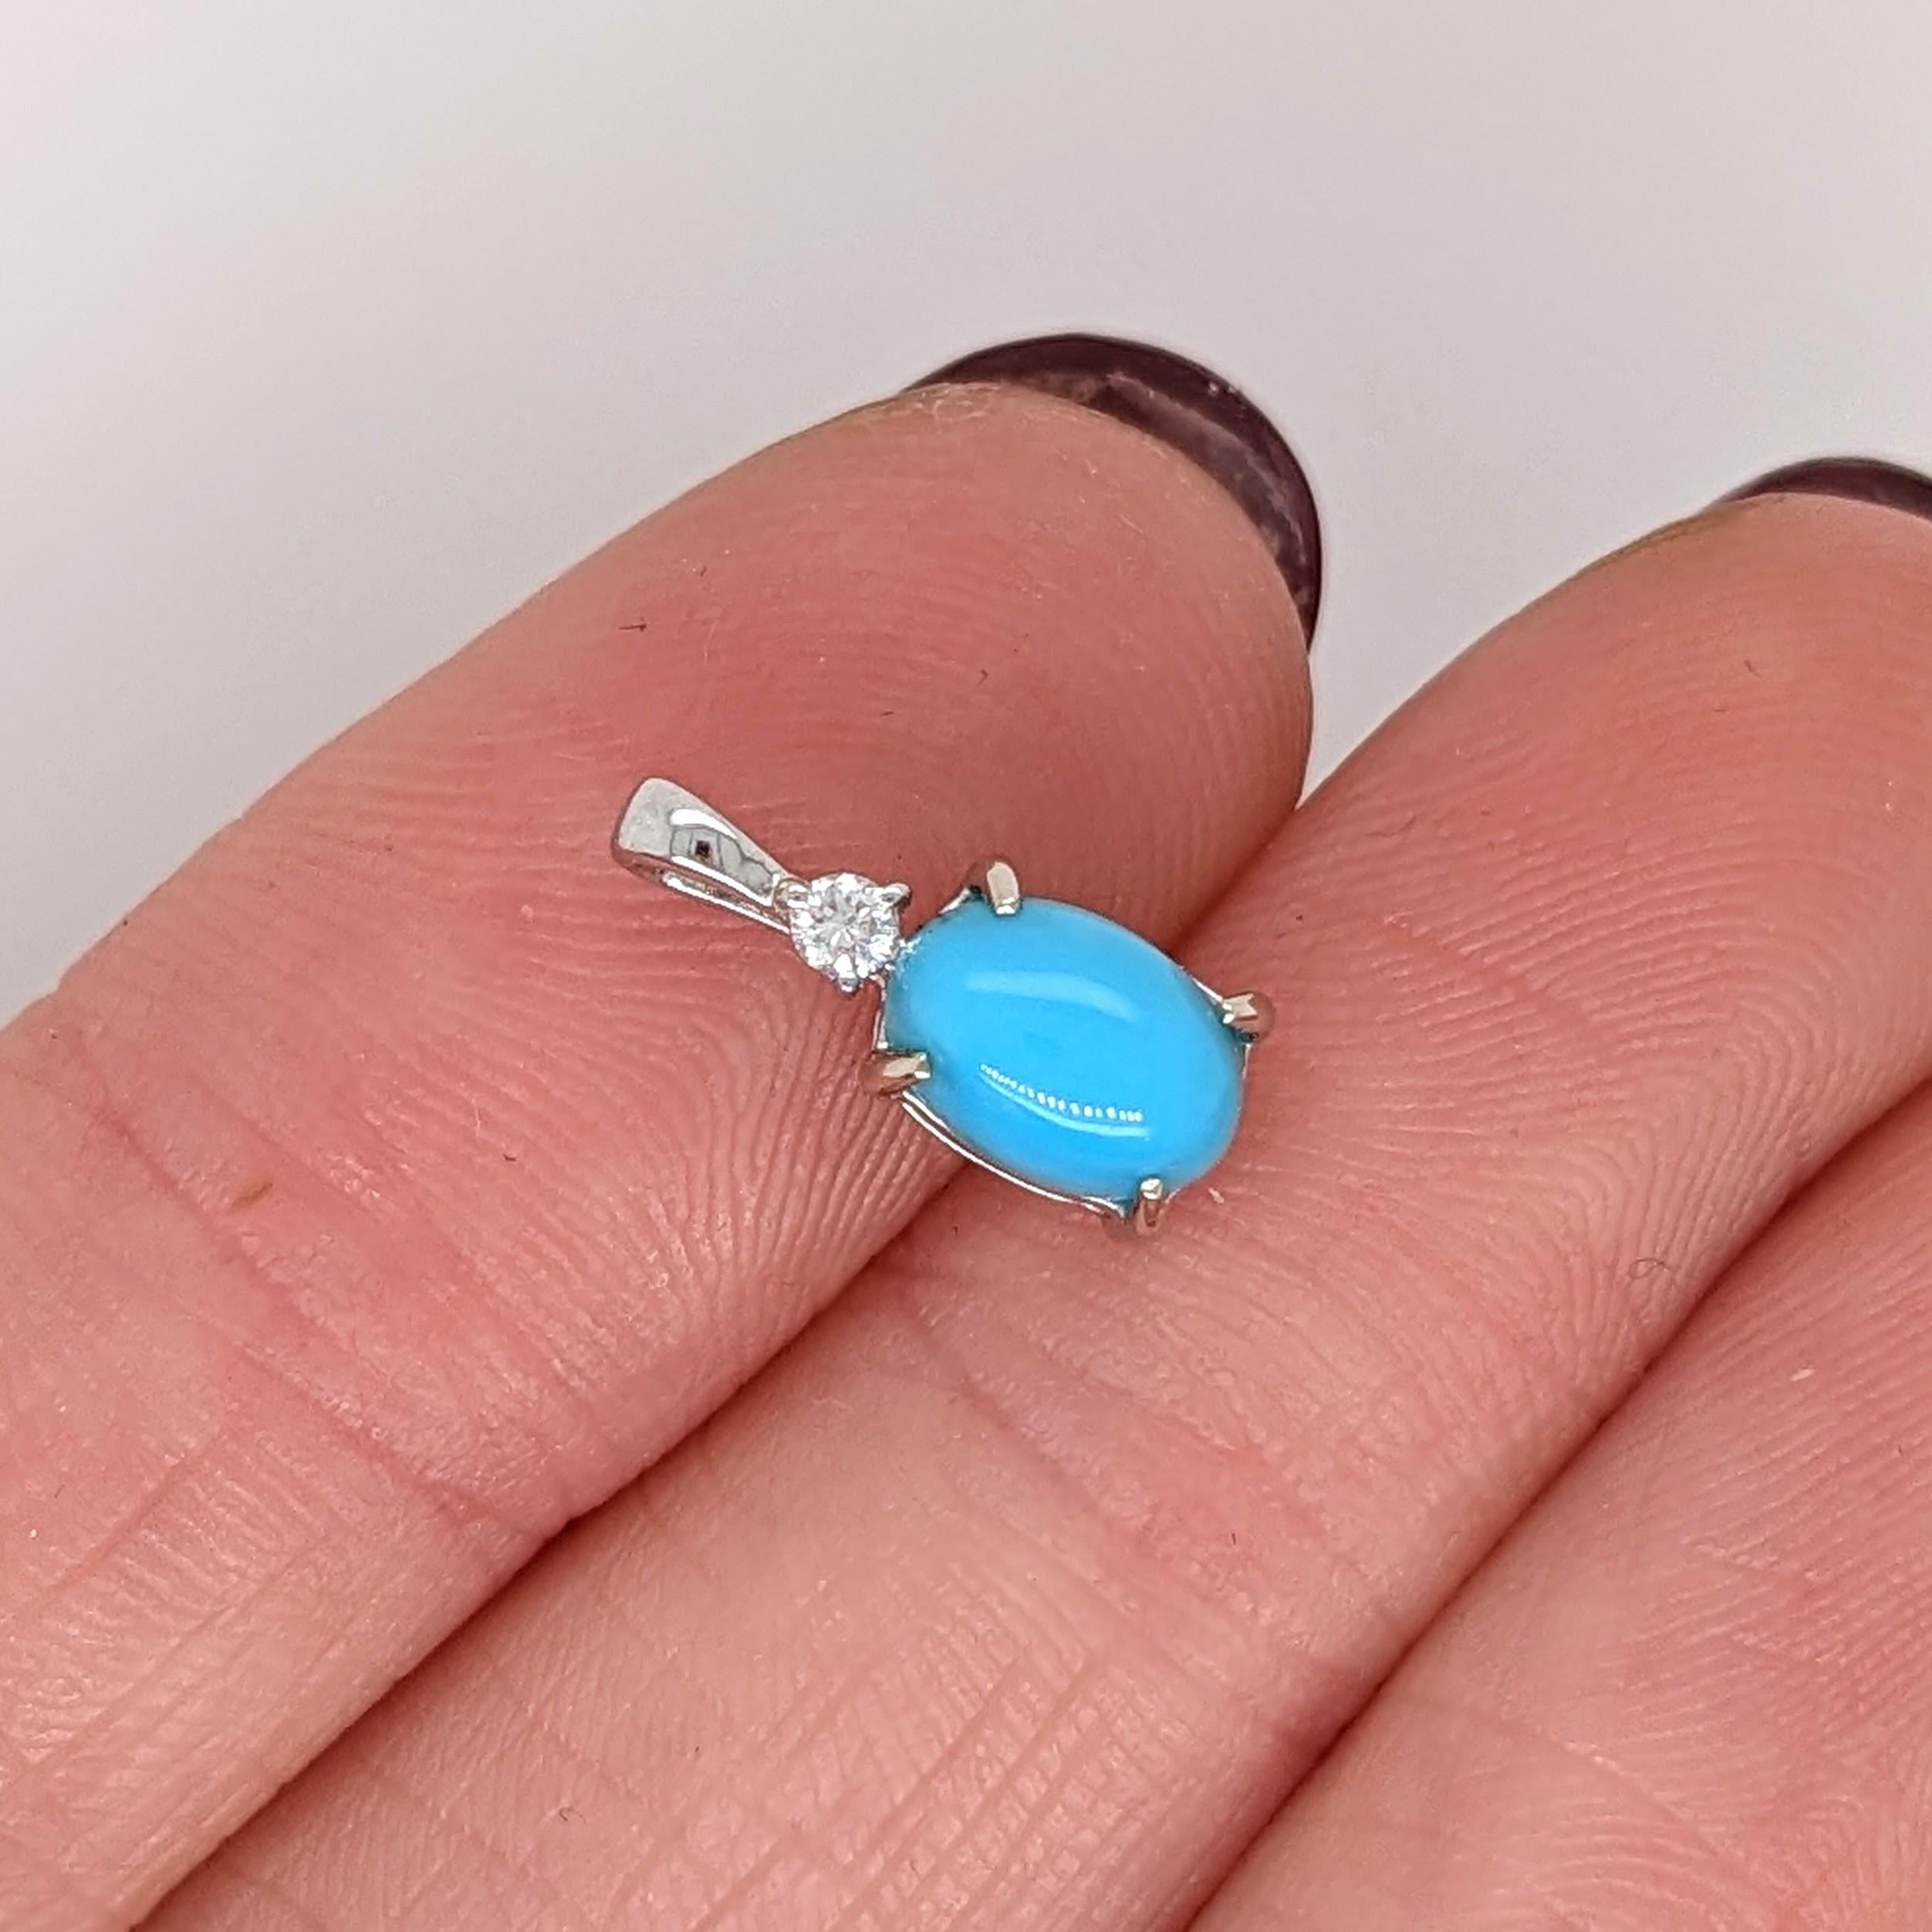 This pendant features a beautiful 7x5mm oval turquoise in solid 14K gold with a natural earth mined diamond accent. This unique piece is perfect for daily wear. This pendant also makes a lovely december birthstone gift for your loved ones!